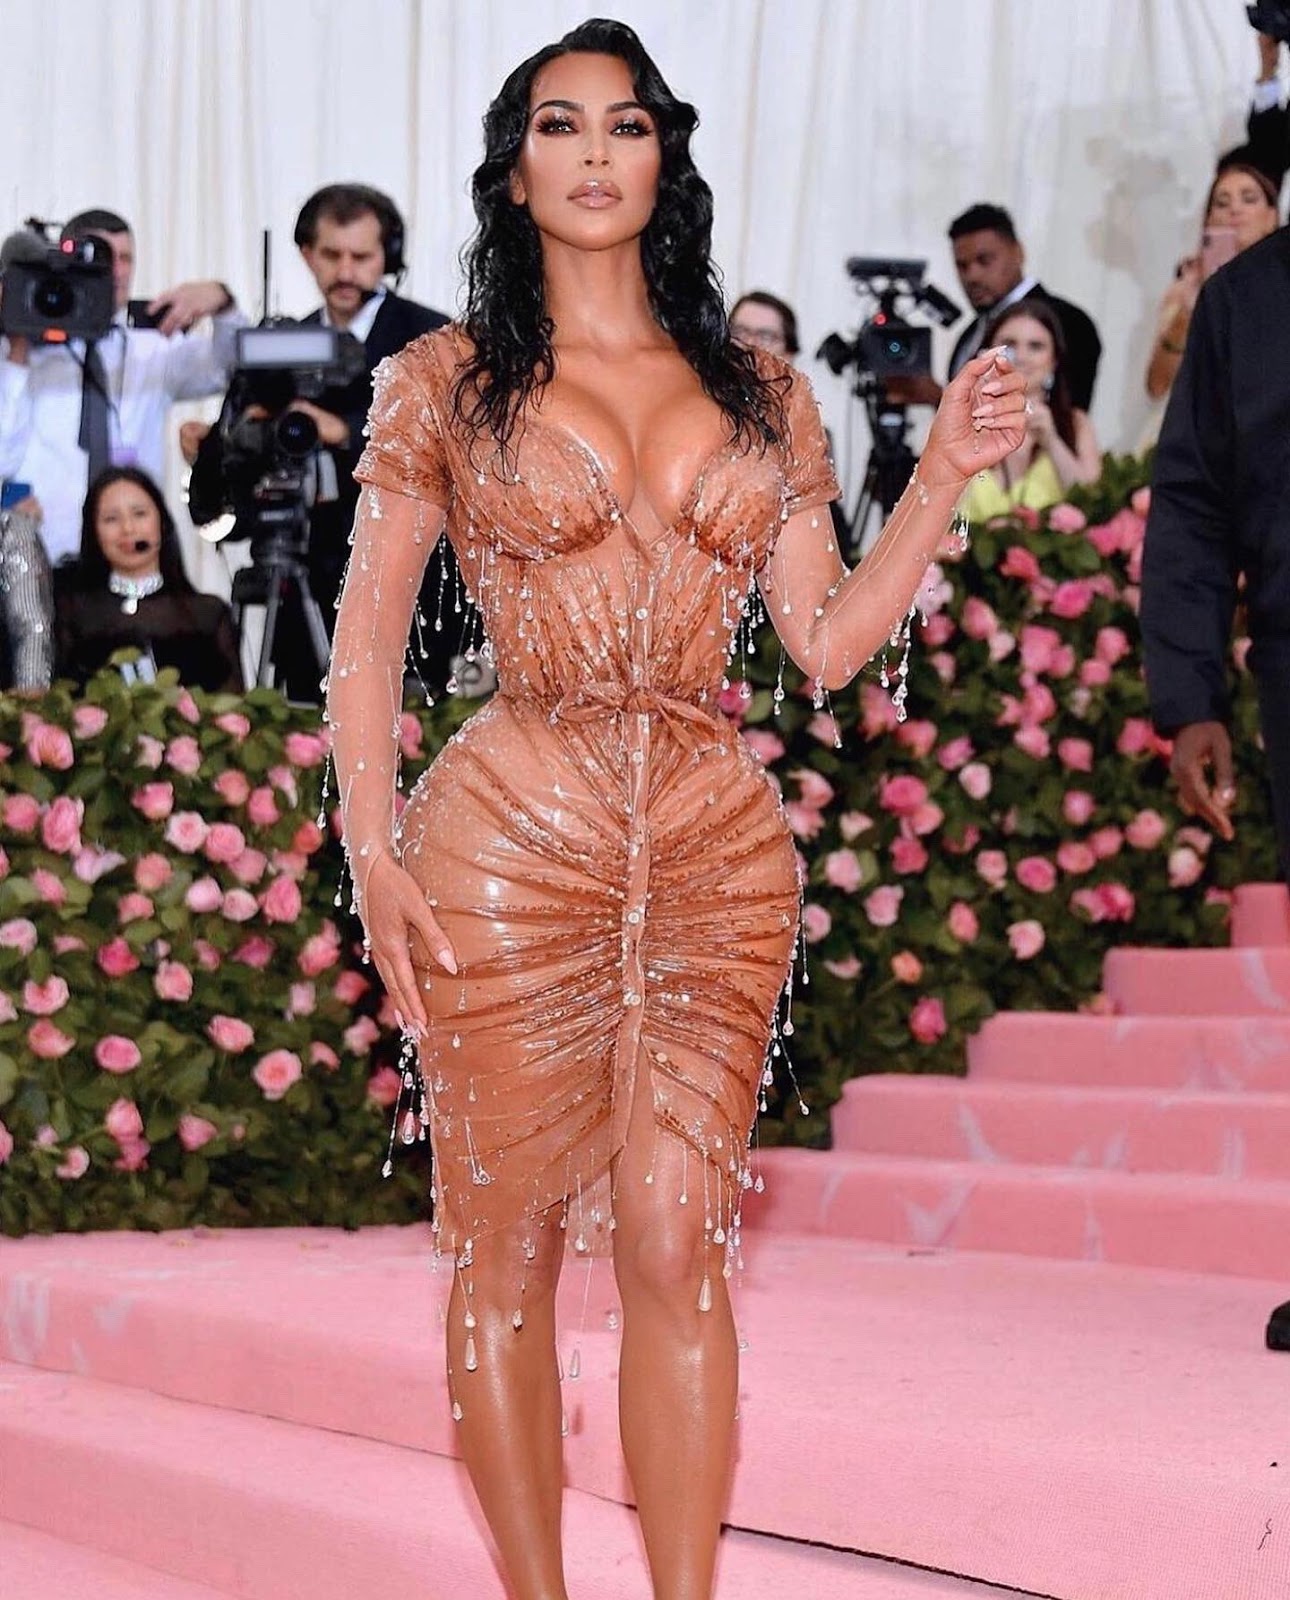 Kim Kardashian West attends The 2019 Met Gala Celebrating Camp: Notes On Fashion in a dress designed by Thierry Mugler. Photograph: Rabbani and Solimene Photography/WireImage